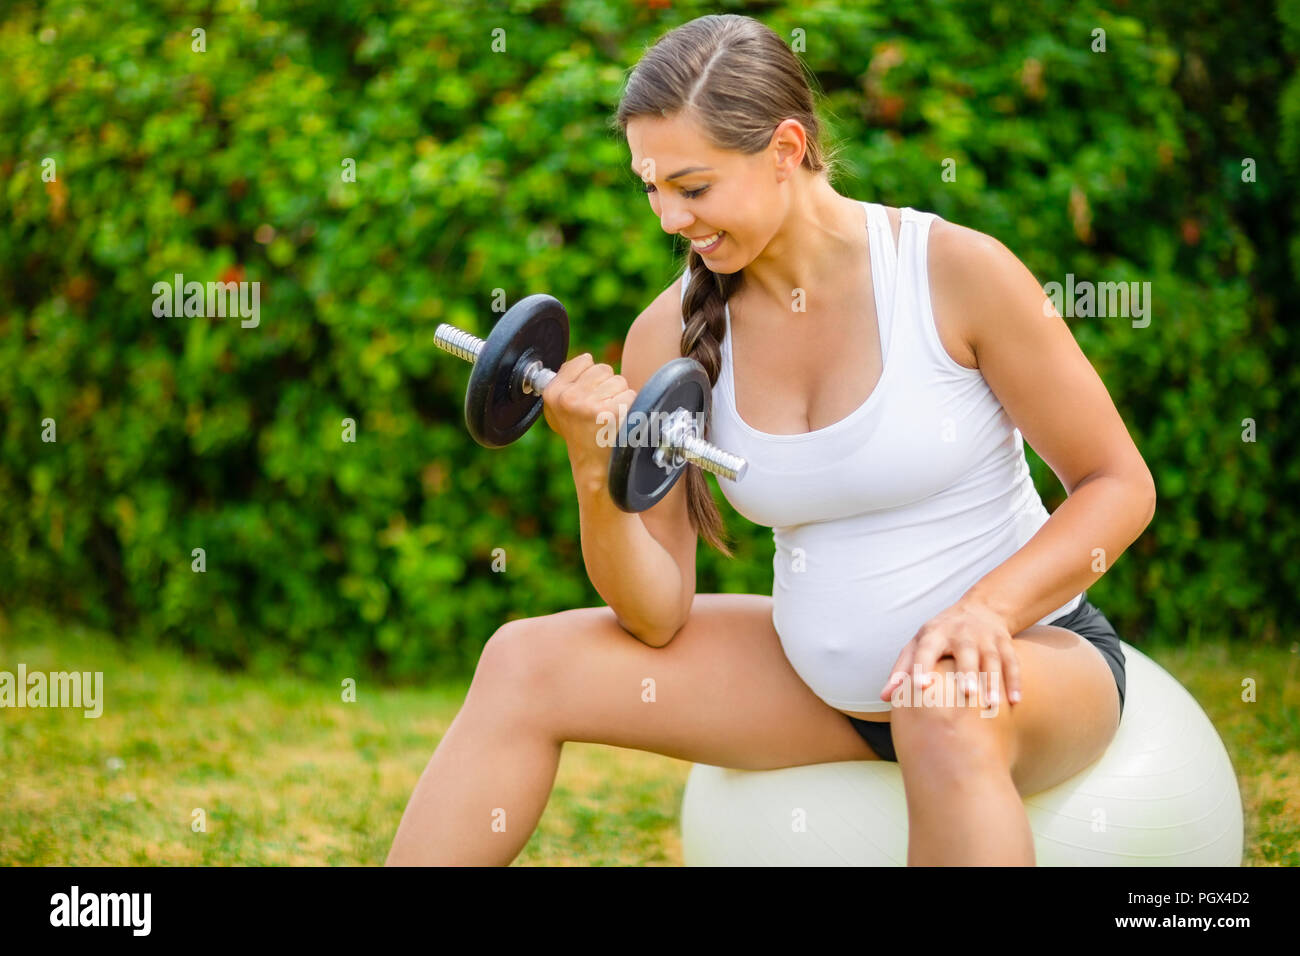 Healthy Pregnant Woman Lifting Weights On Exercise Ball In Park Stock Photo